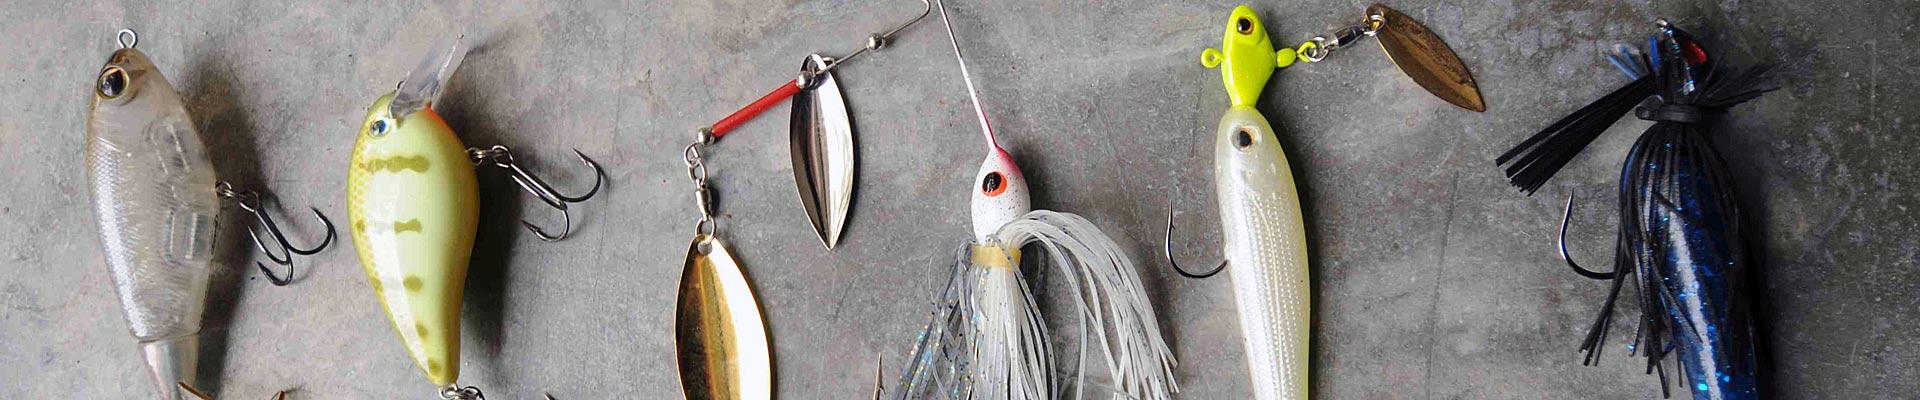 Baits That Trigger Reaction Bites  The Ultimate Bass Fishing Resource Guide®  LLC